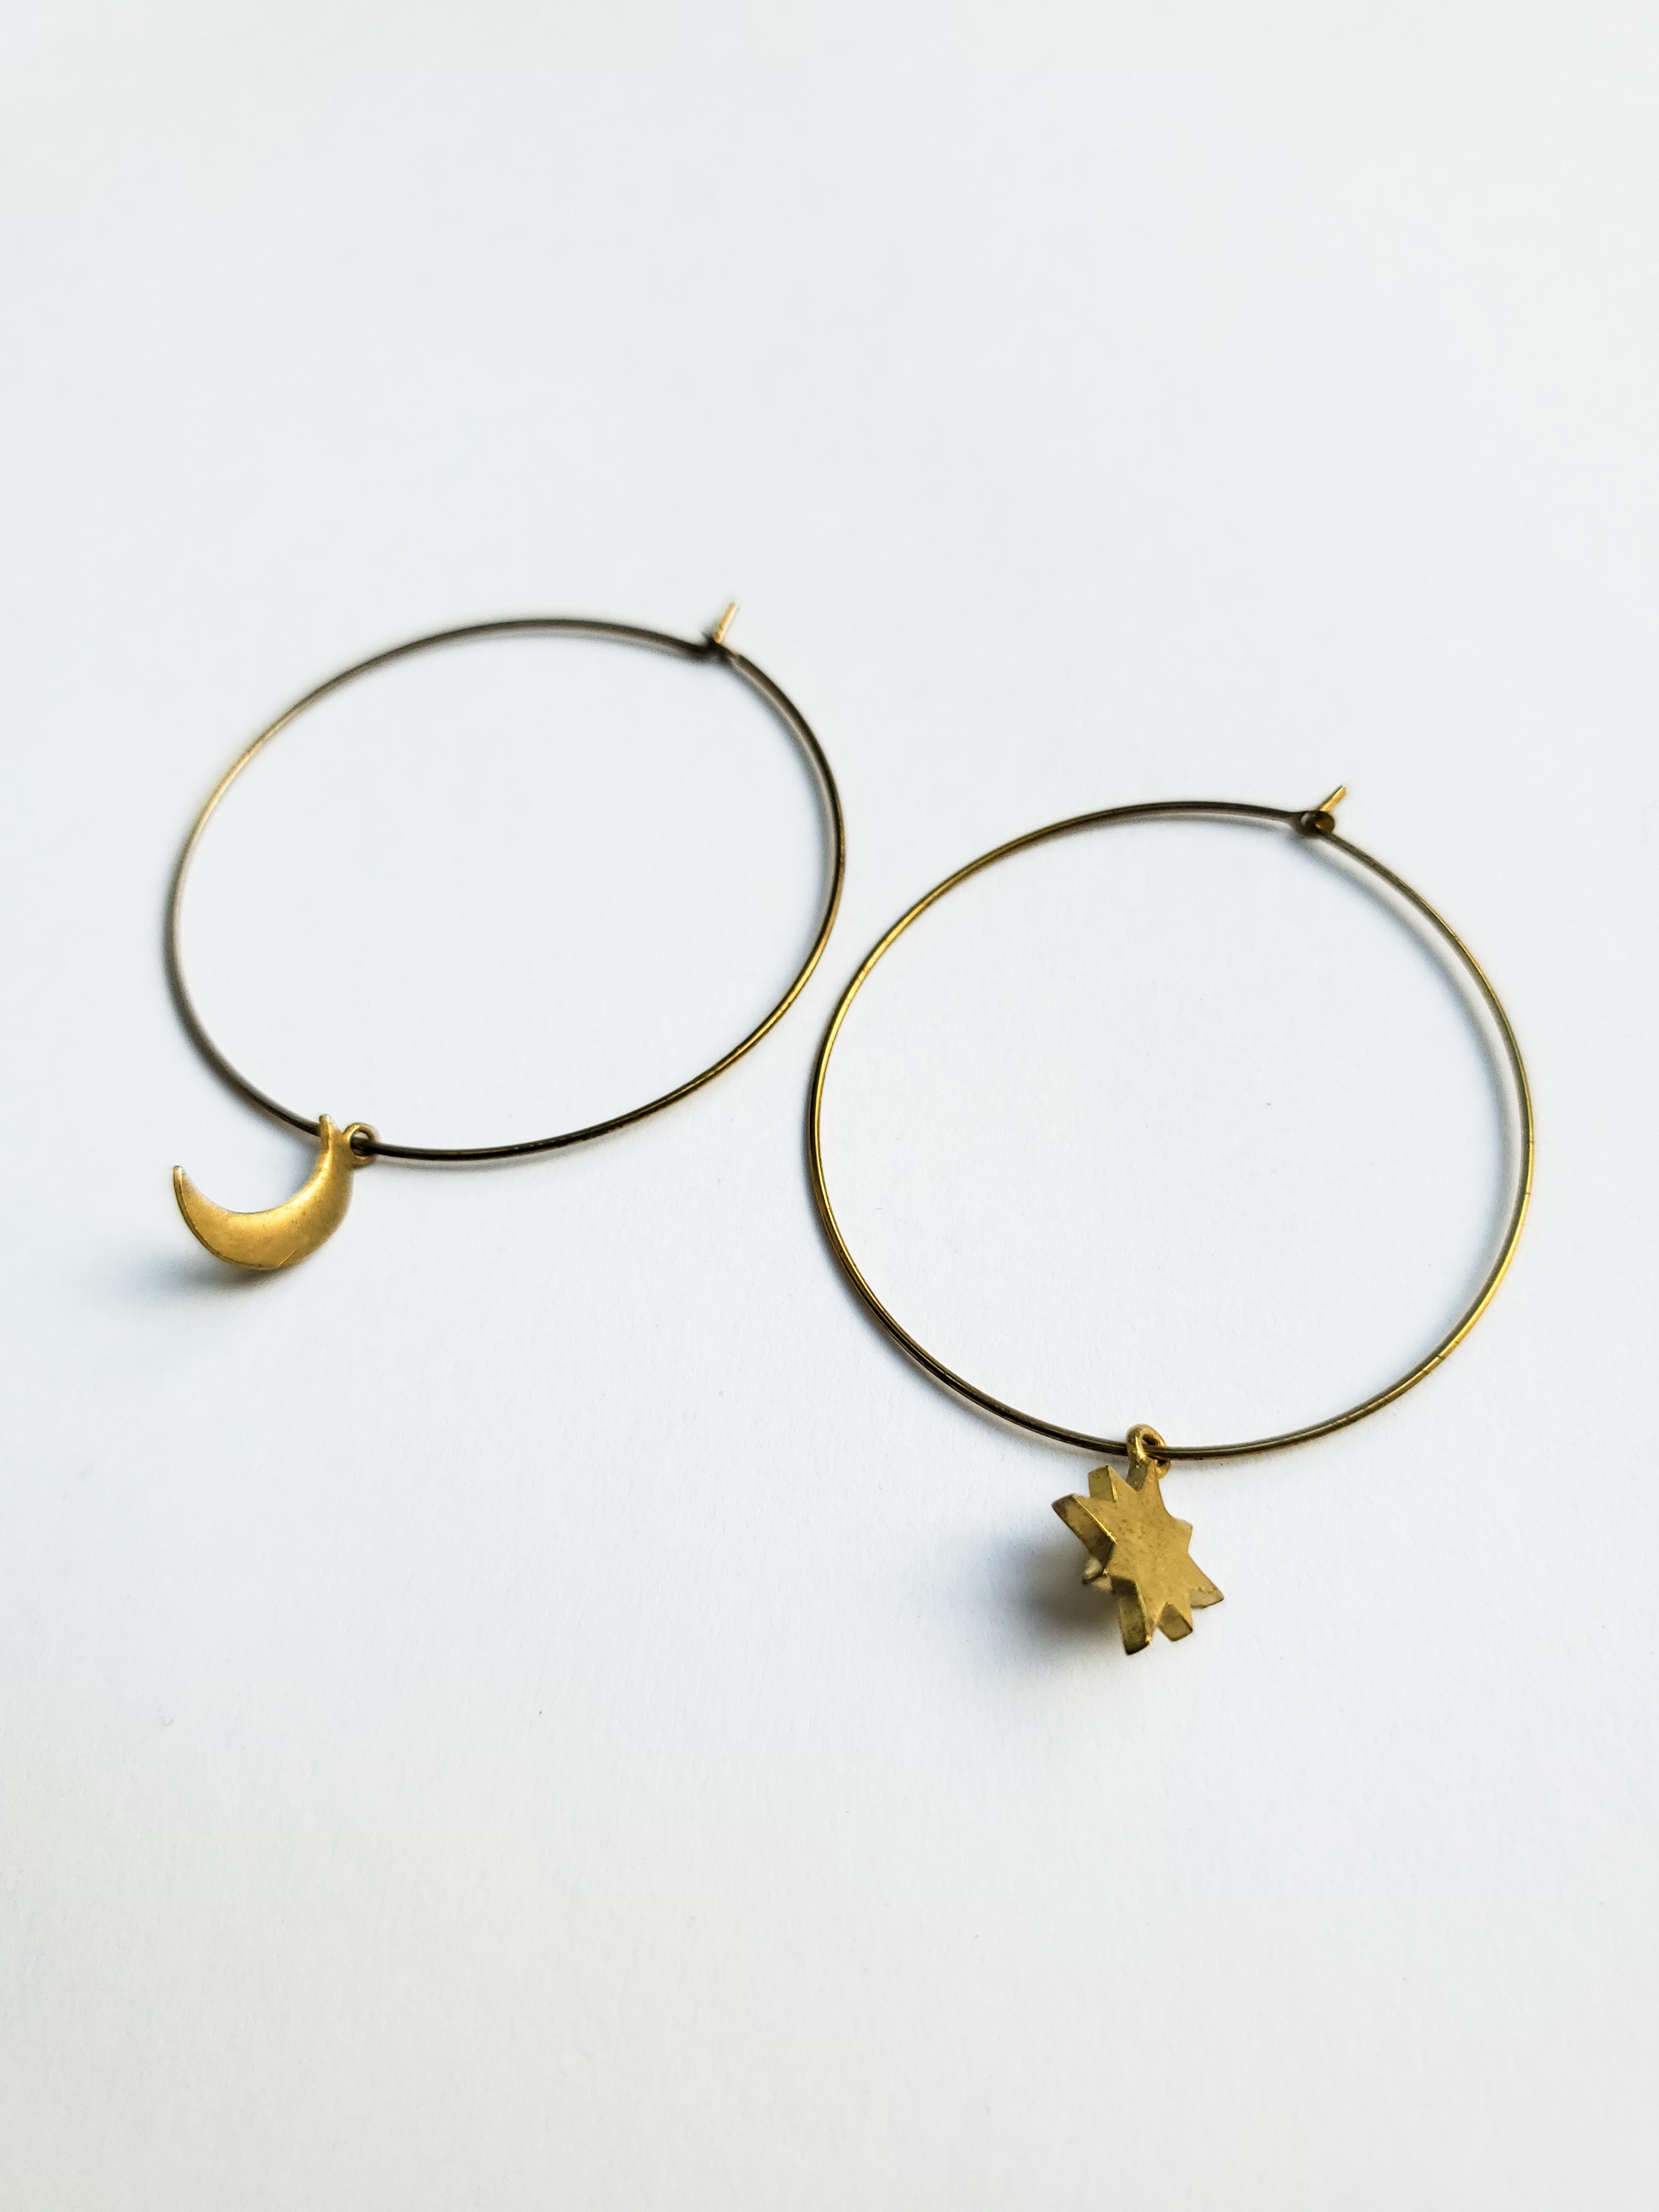 Two golden hoop earrings, one with a crescent moon charm and the other with a star charm.